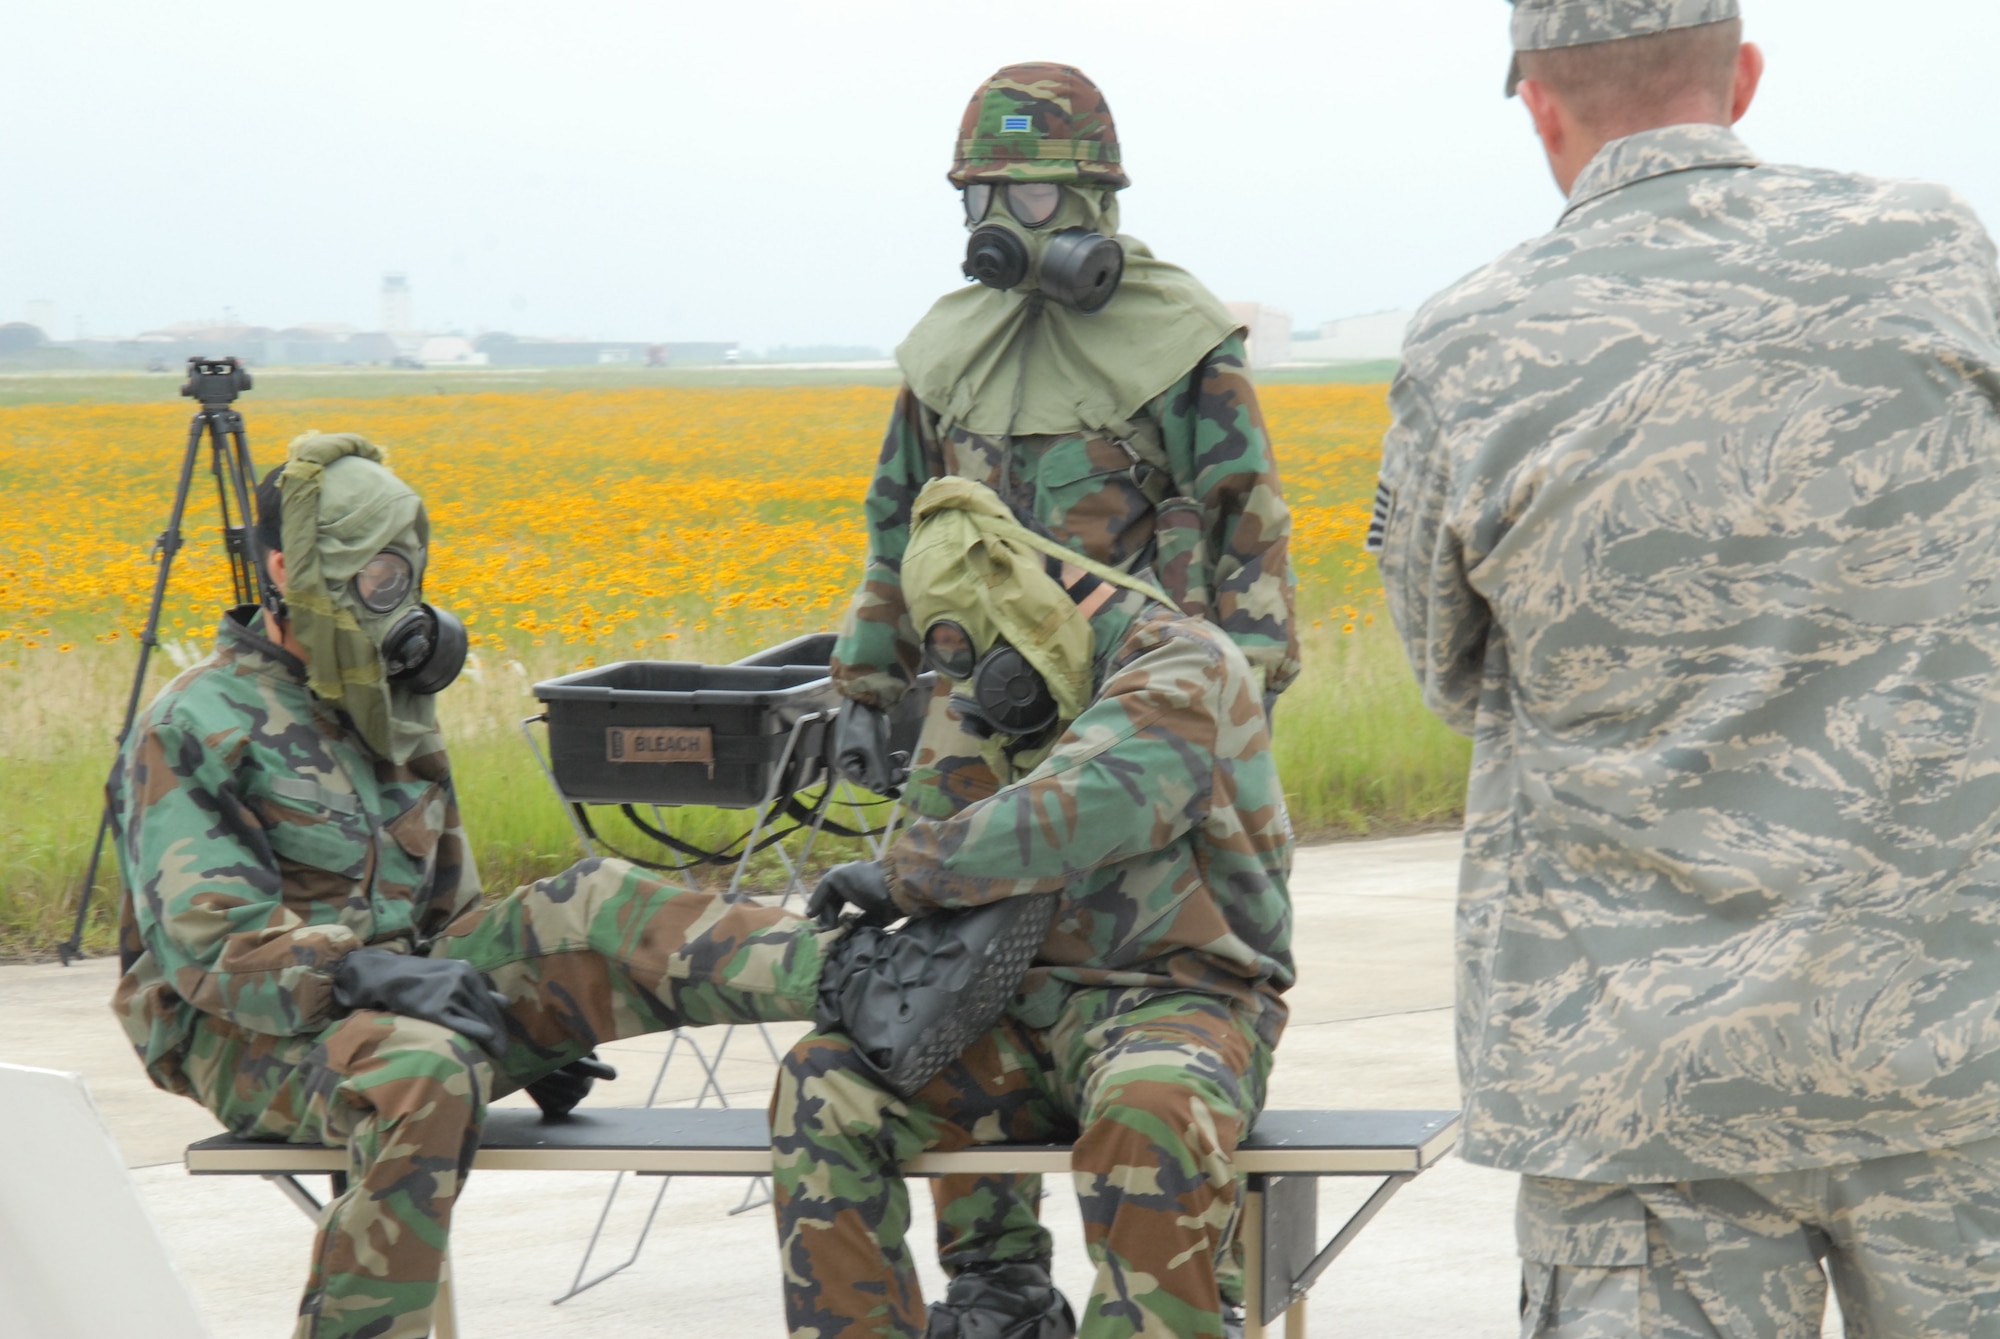 KUNSAN AIR BASE, Republic of Korea — Tech. Sgt. Frank Roman, NCO in charge of readiness and training from the 8th Civil Engineer squadron observes Republic of Korea Army soldiers while they remove their chemical warfare gear here 24 June. (U.S. Air Force Photo/Staff Sgt Araceli Alarcon)